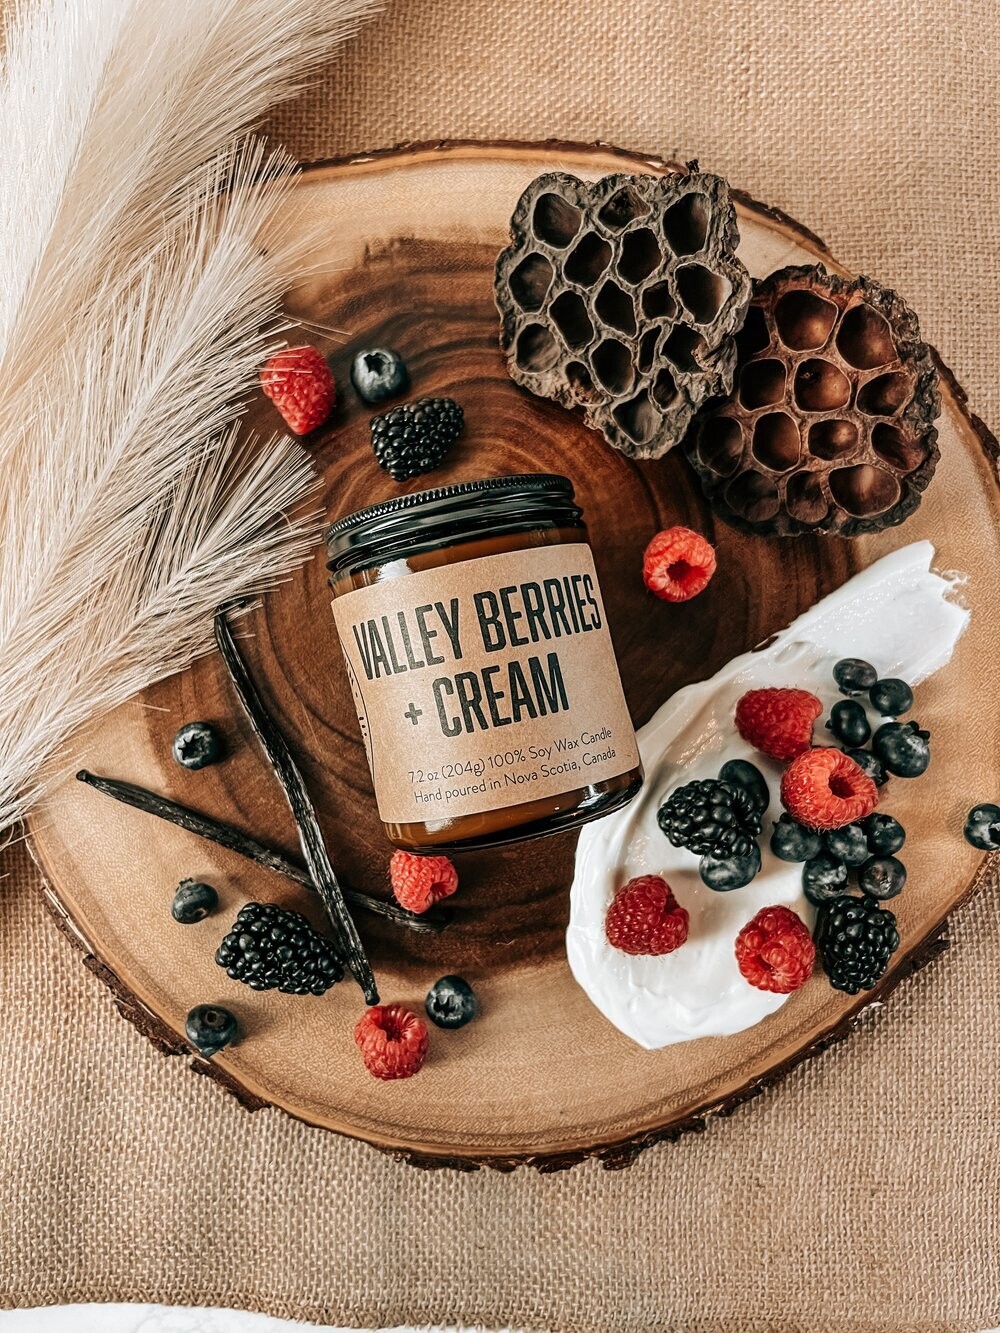 Valley Berries and Cream -Lawrencetown Candle Co 